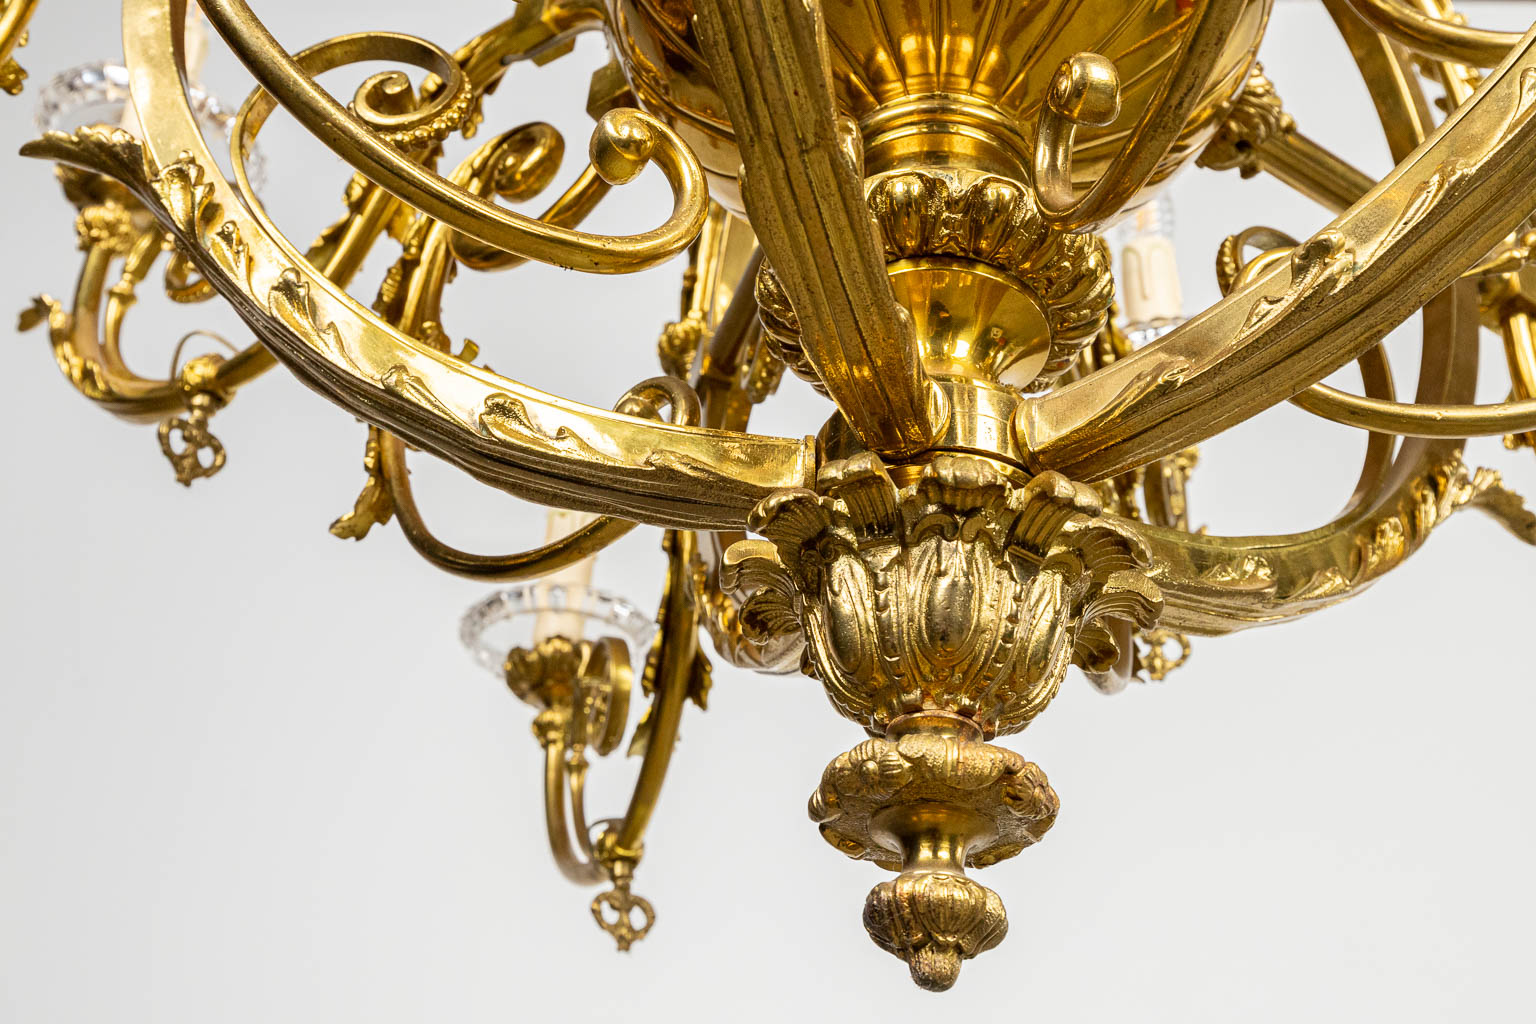 An antique and electrified gas chandelier, made of bronze